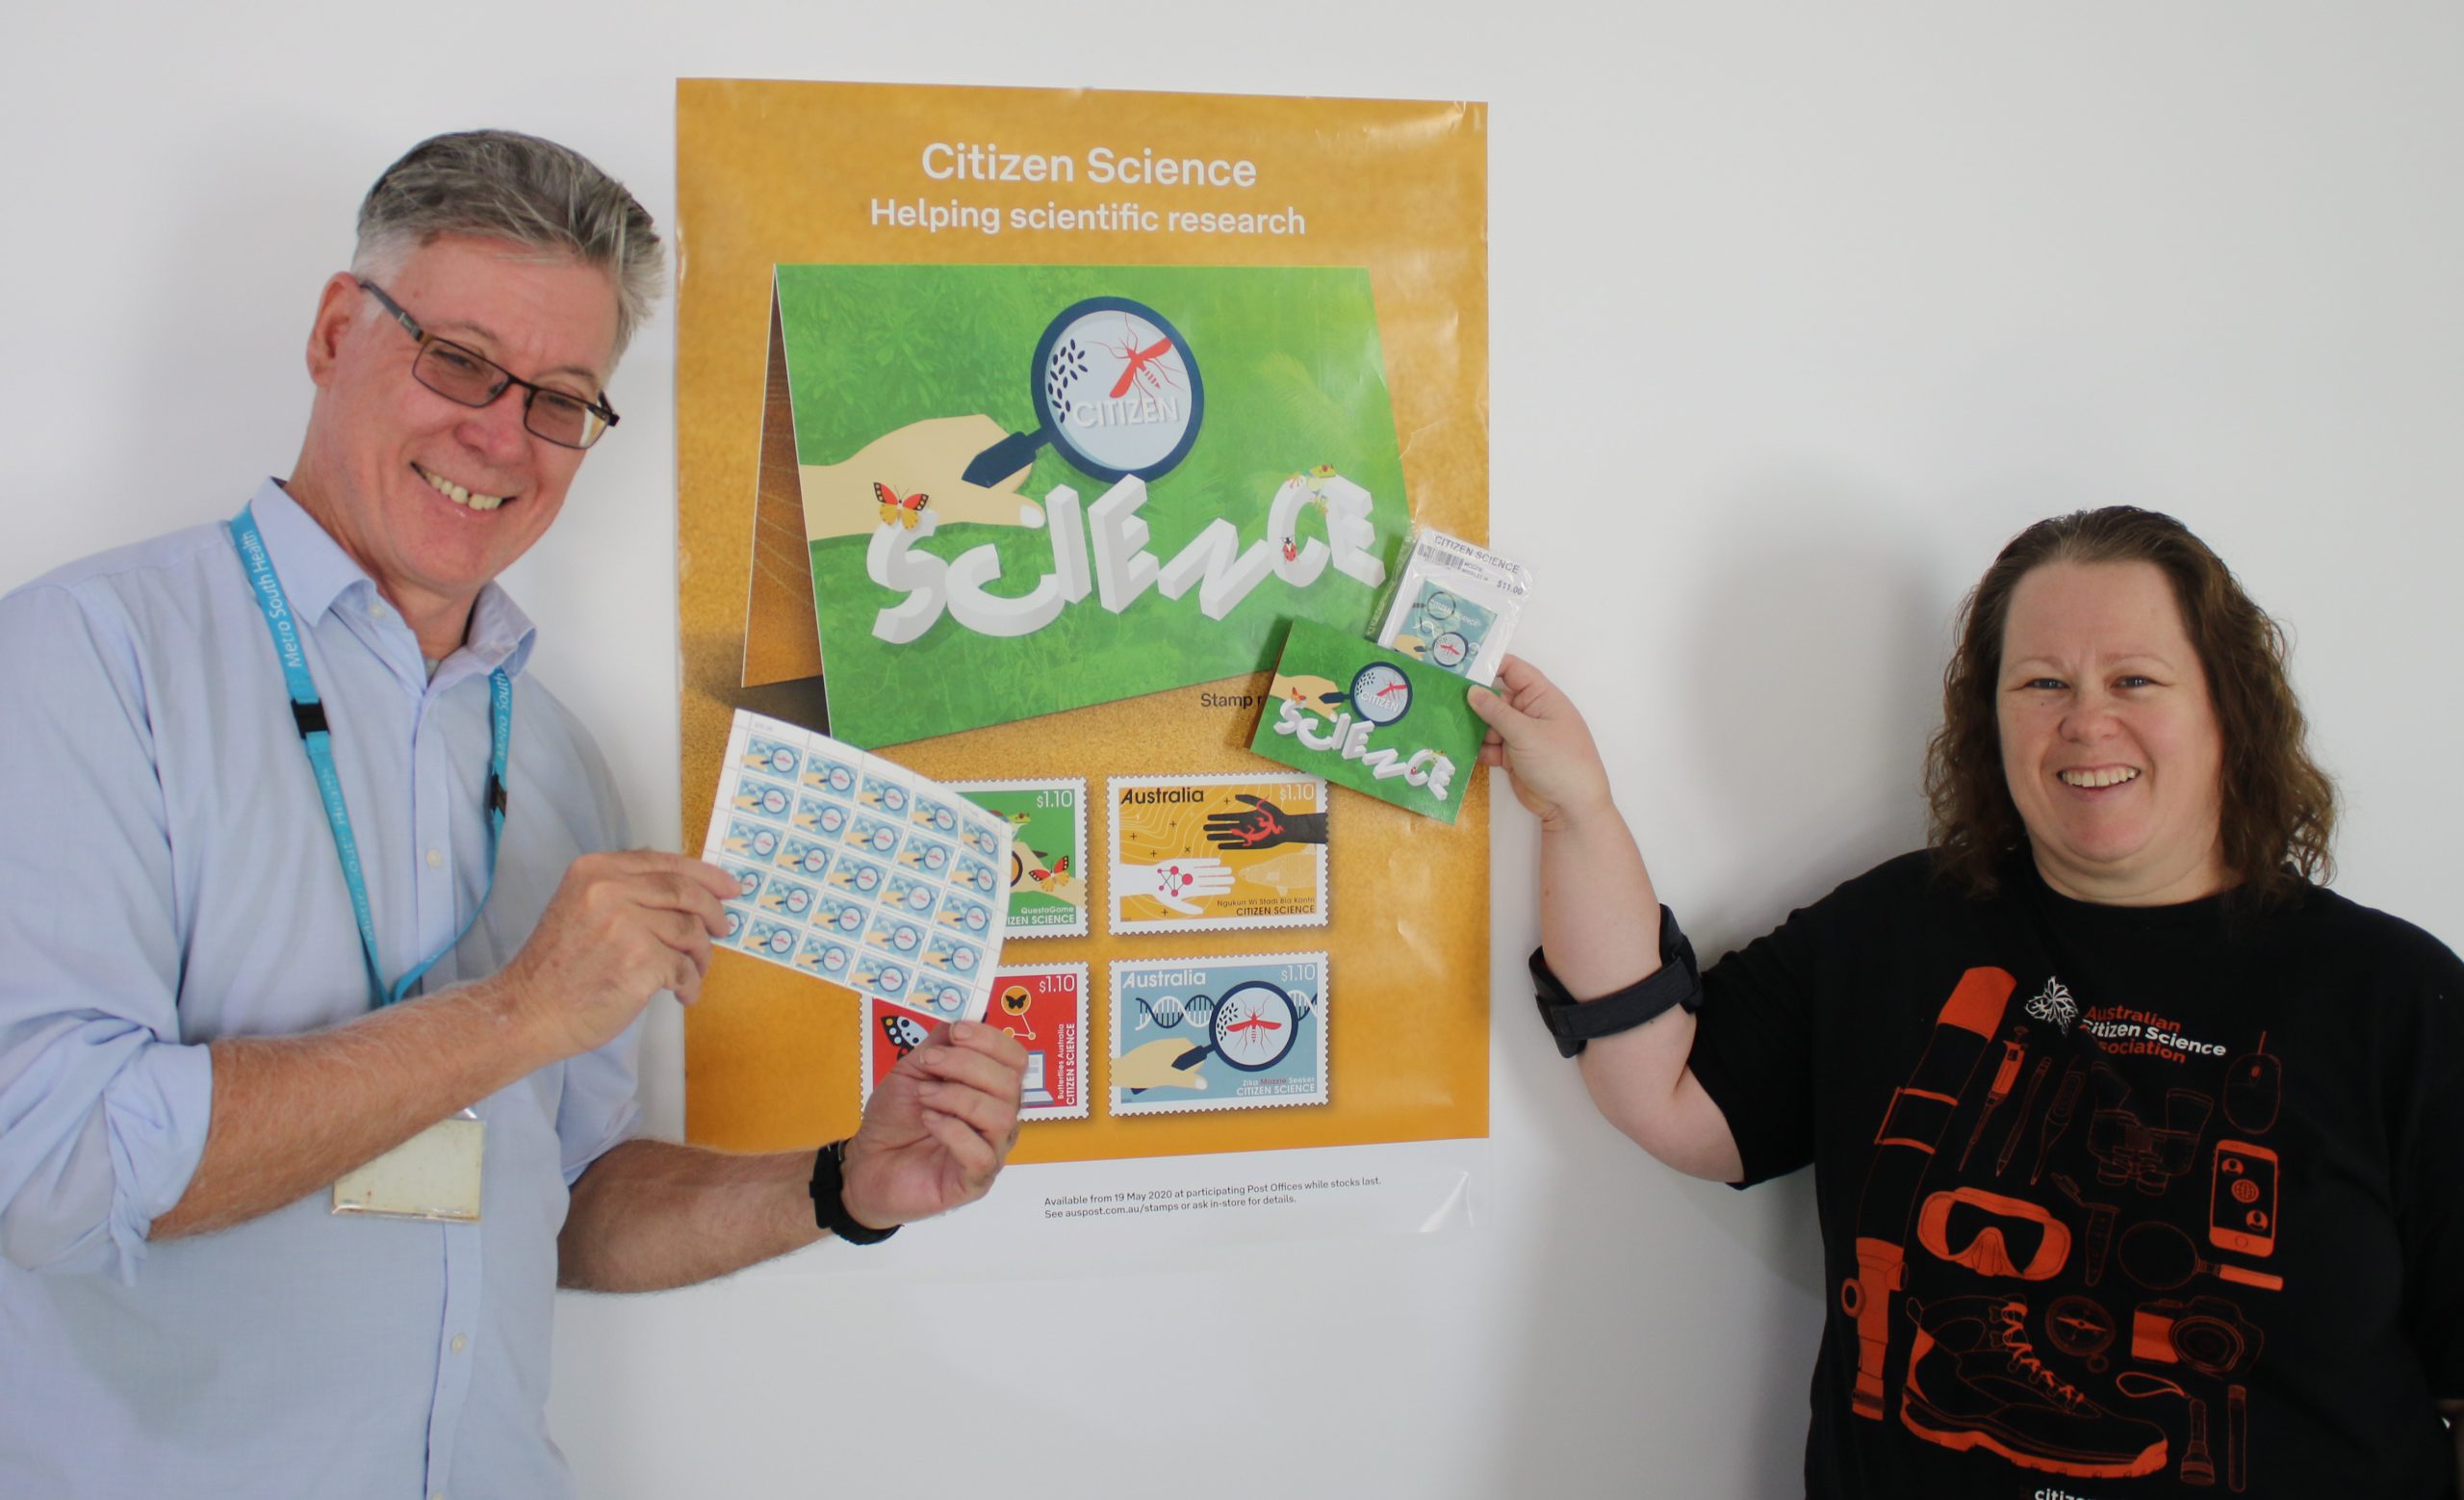 Putting a Citizen Science Stamp on it!